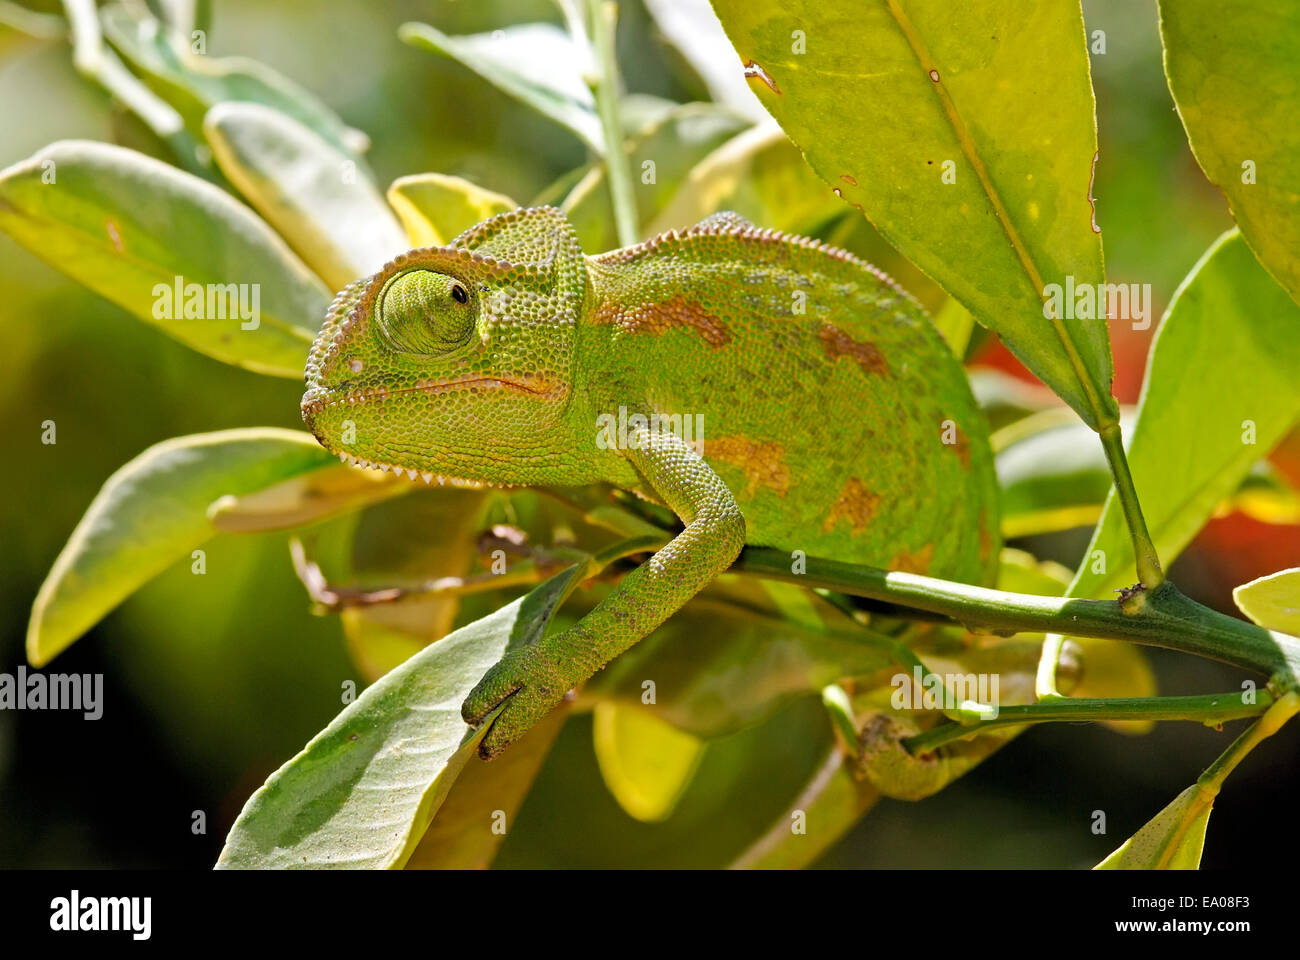 Chameleon, Camouflage color pattern Stock Photo